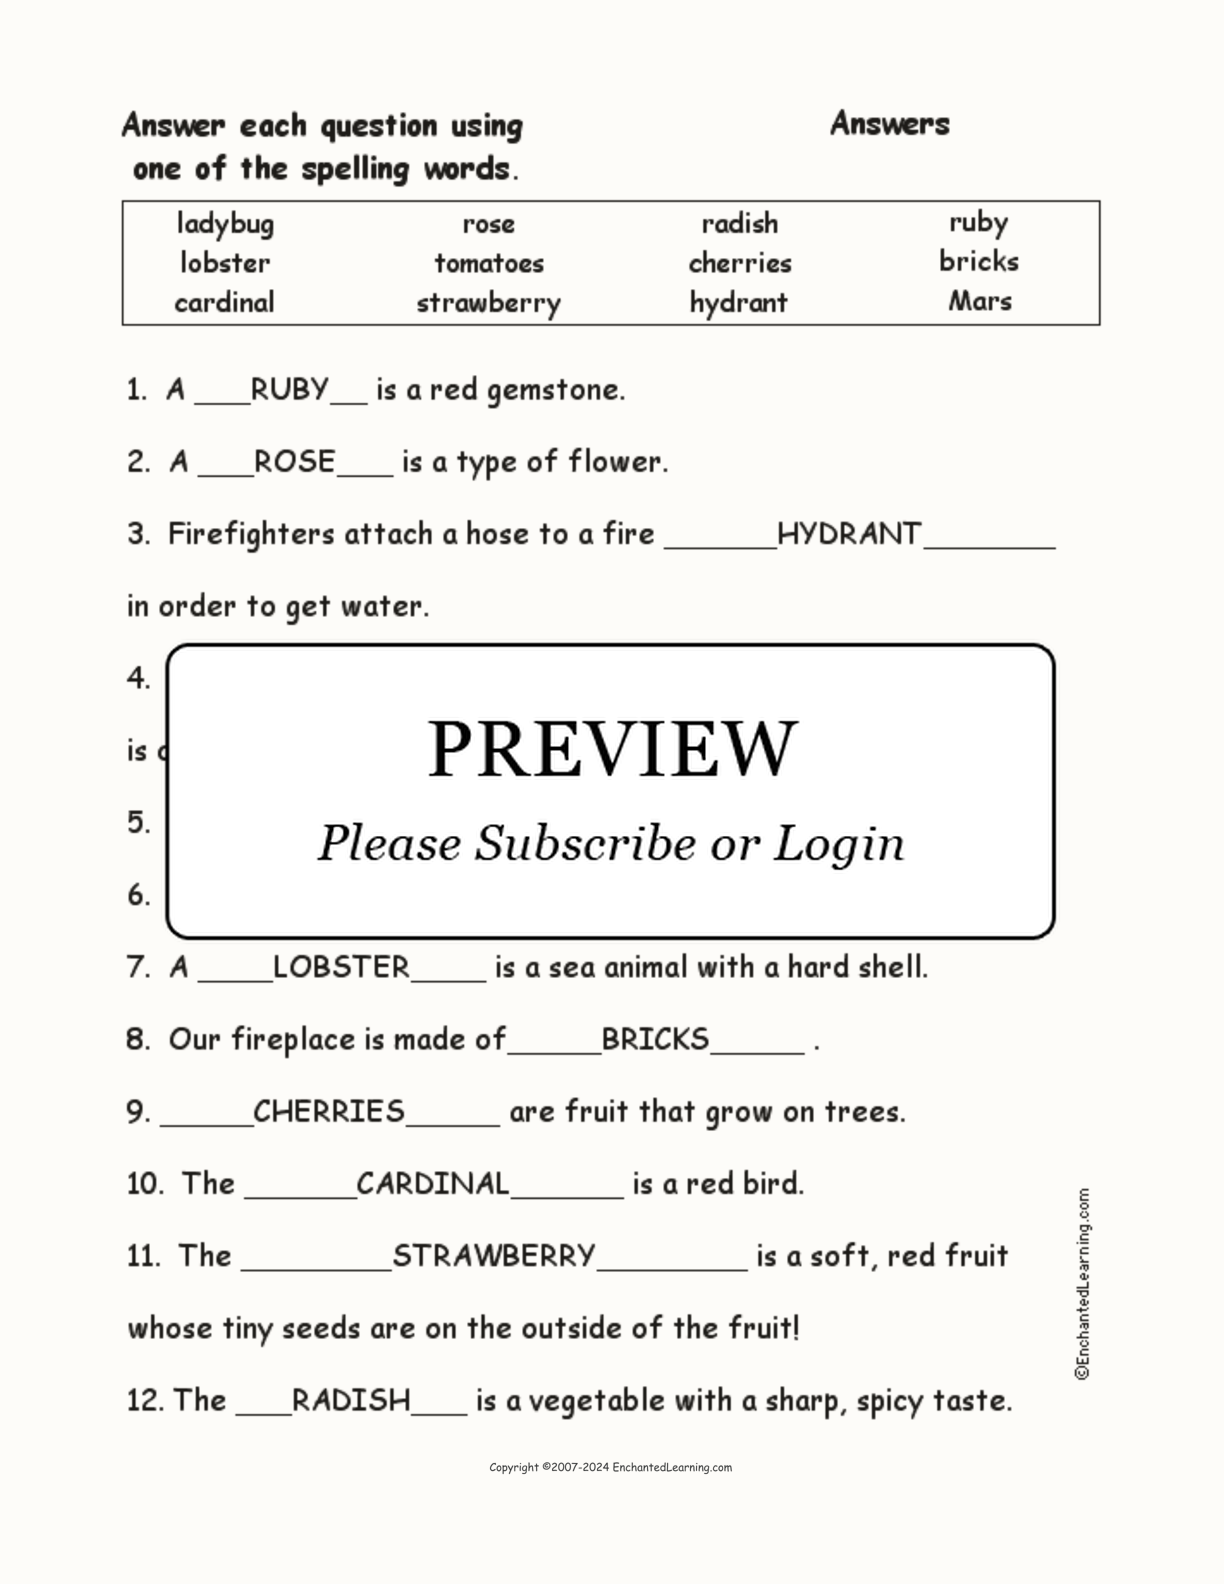 Red Things: Spelling Word Questions interactive worksheet page 2